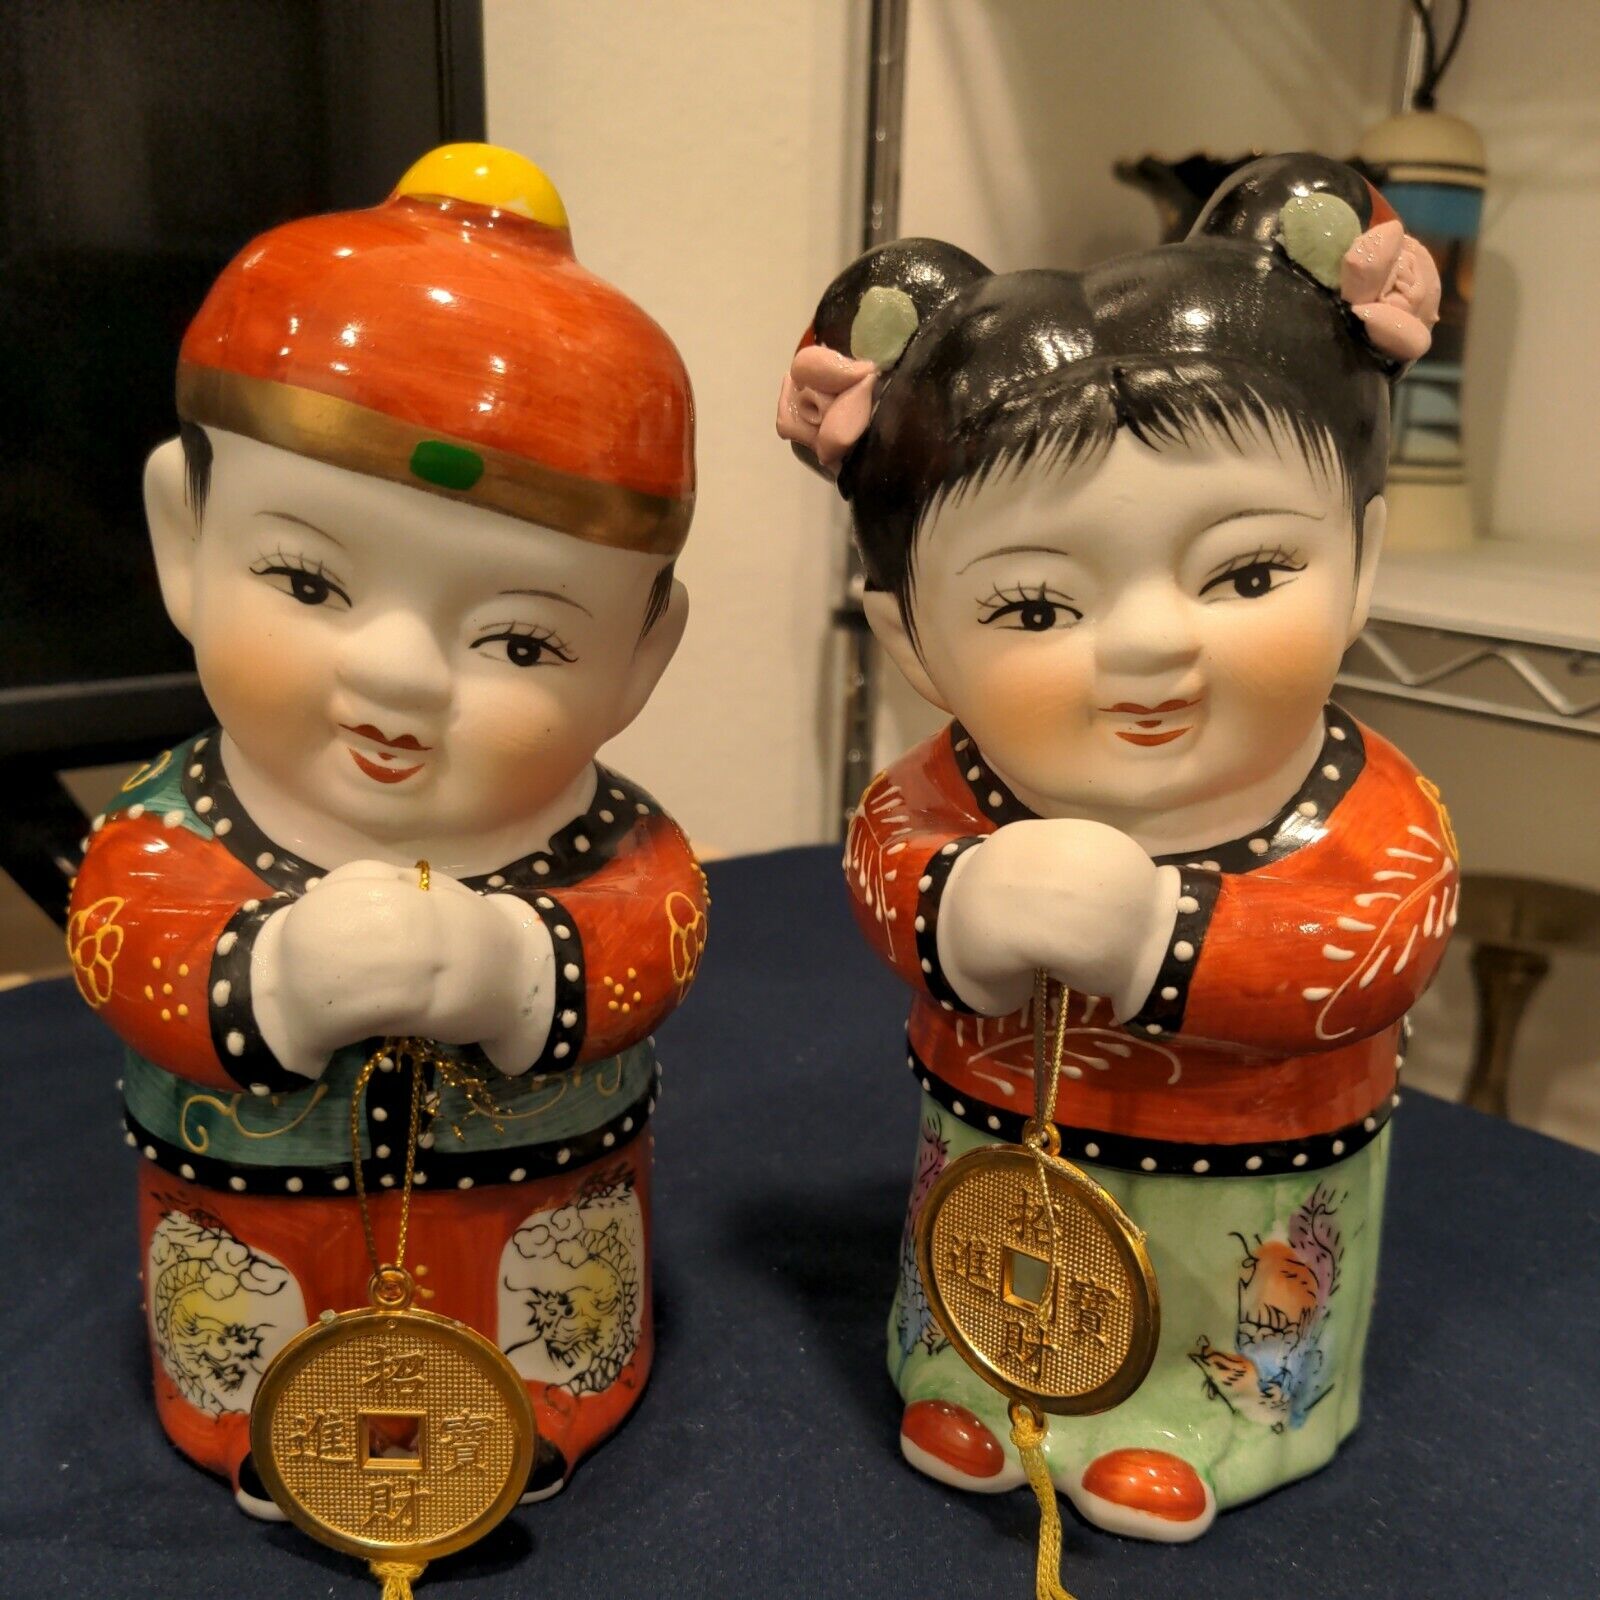 vintage hand painted boy and girl dolls, porcelain Japanese's style, beautiful!